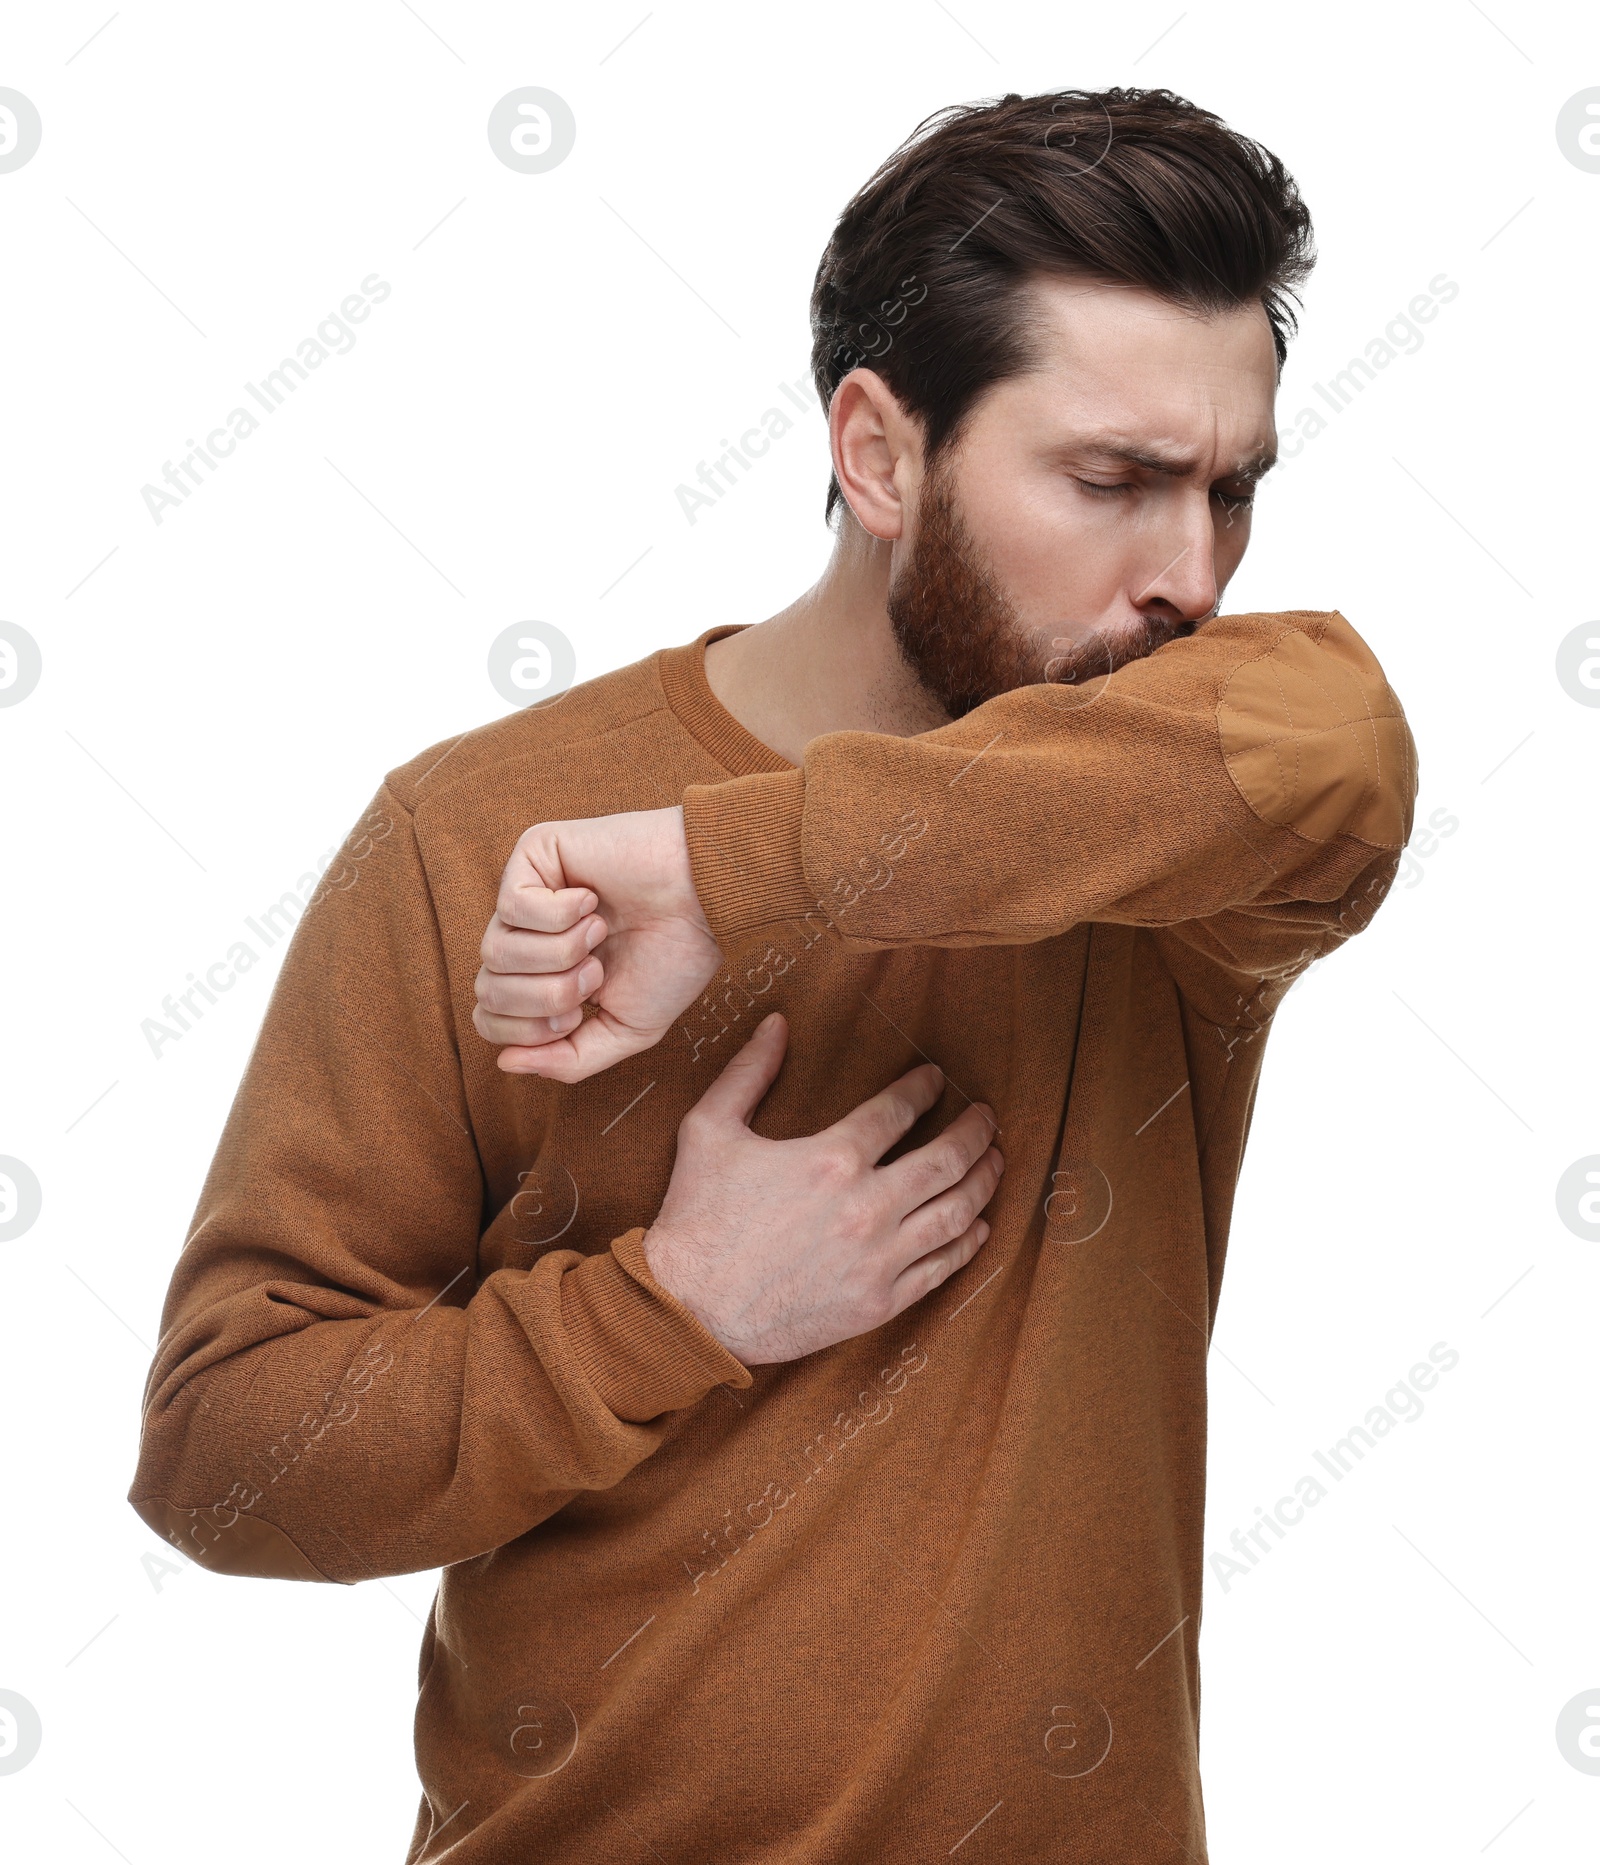 Photo of Sick man coughing into his elbow on white background. Cold symptoms